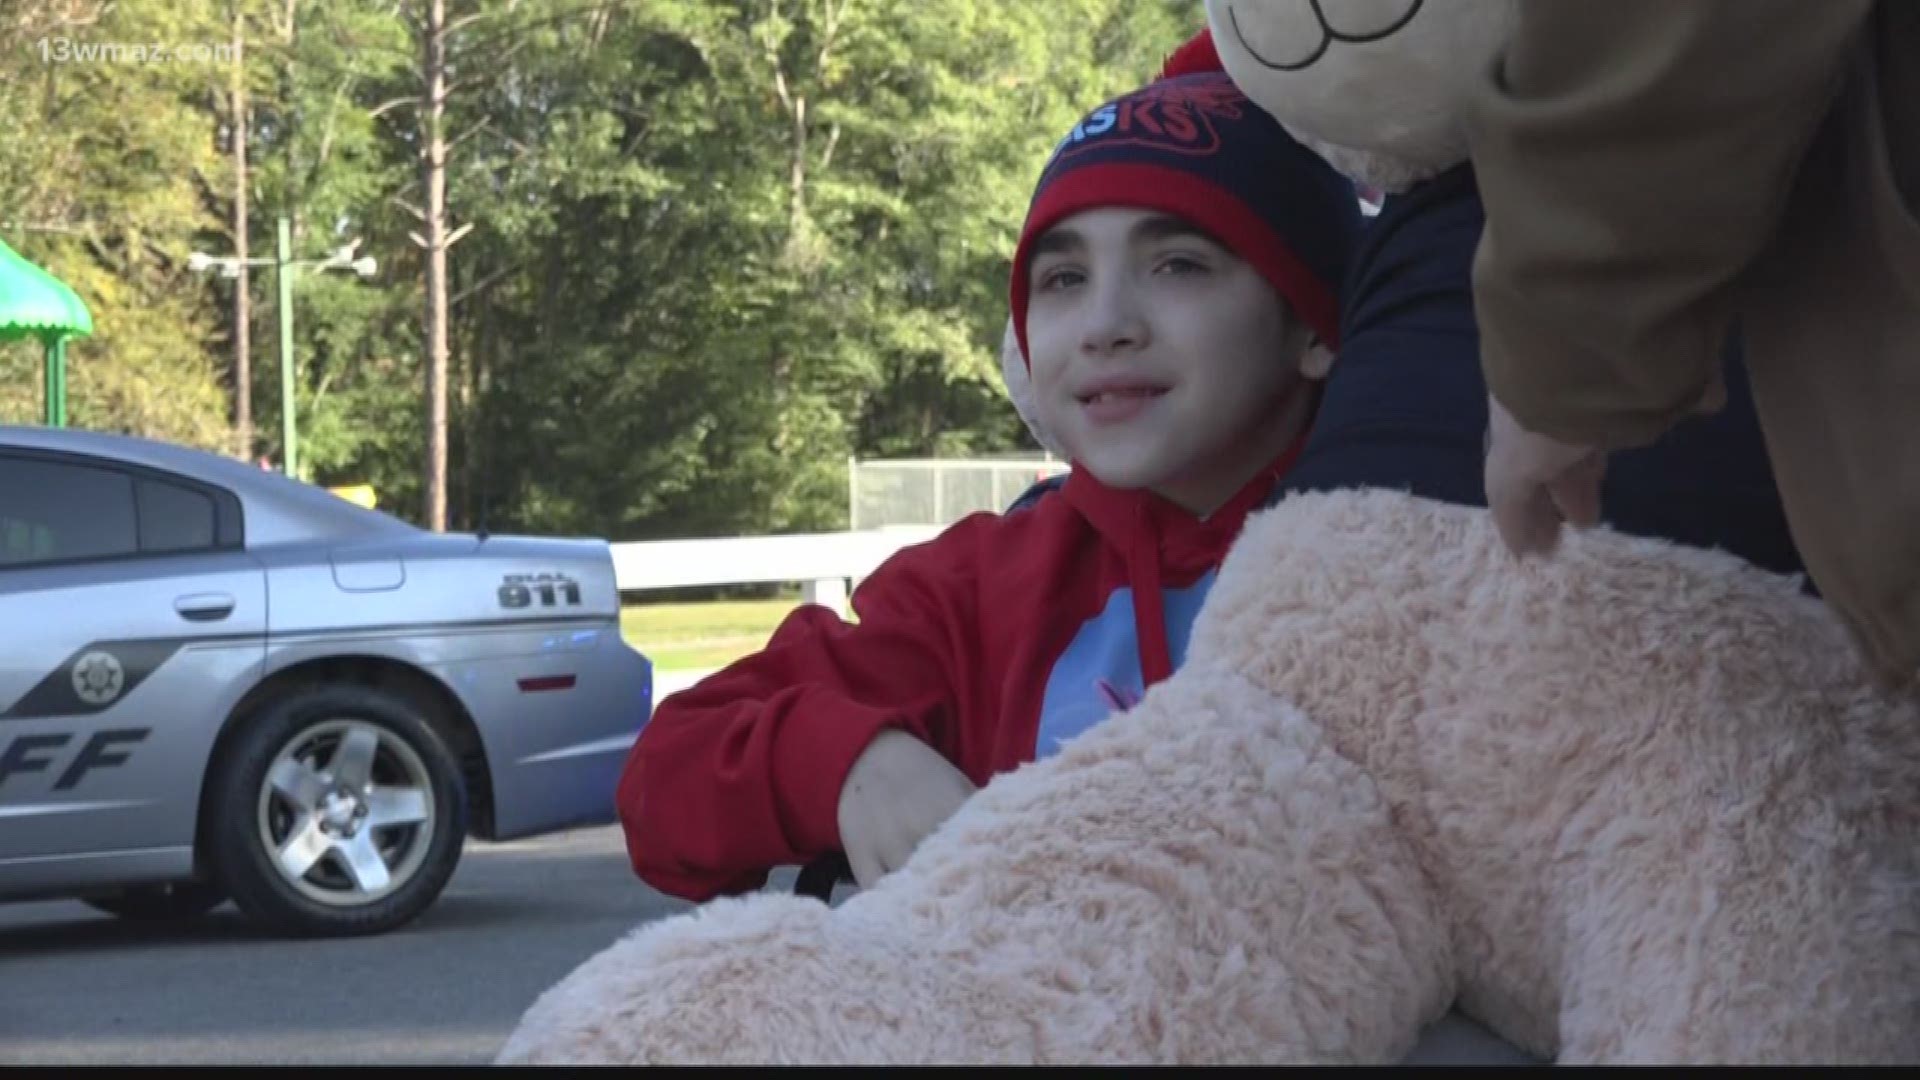 11-year-old Mason Ring is battling cancer, and he collects law enforcement patches. On Saturday, local law enforcement came together to help grow his collection.